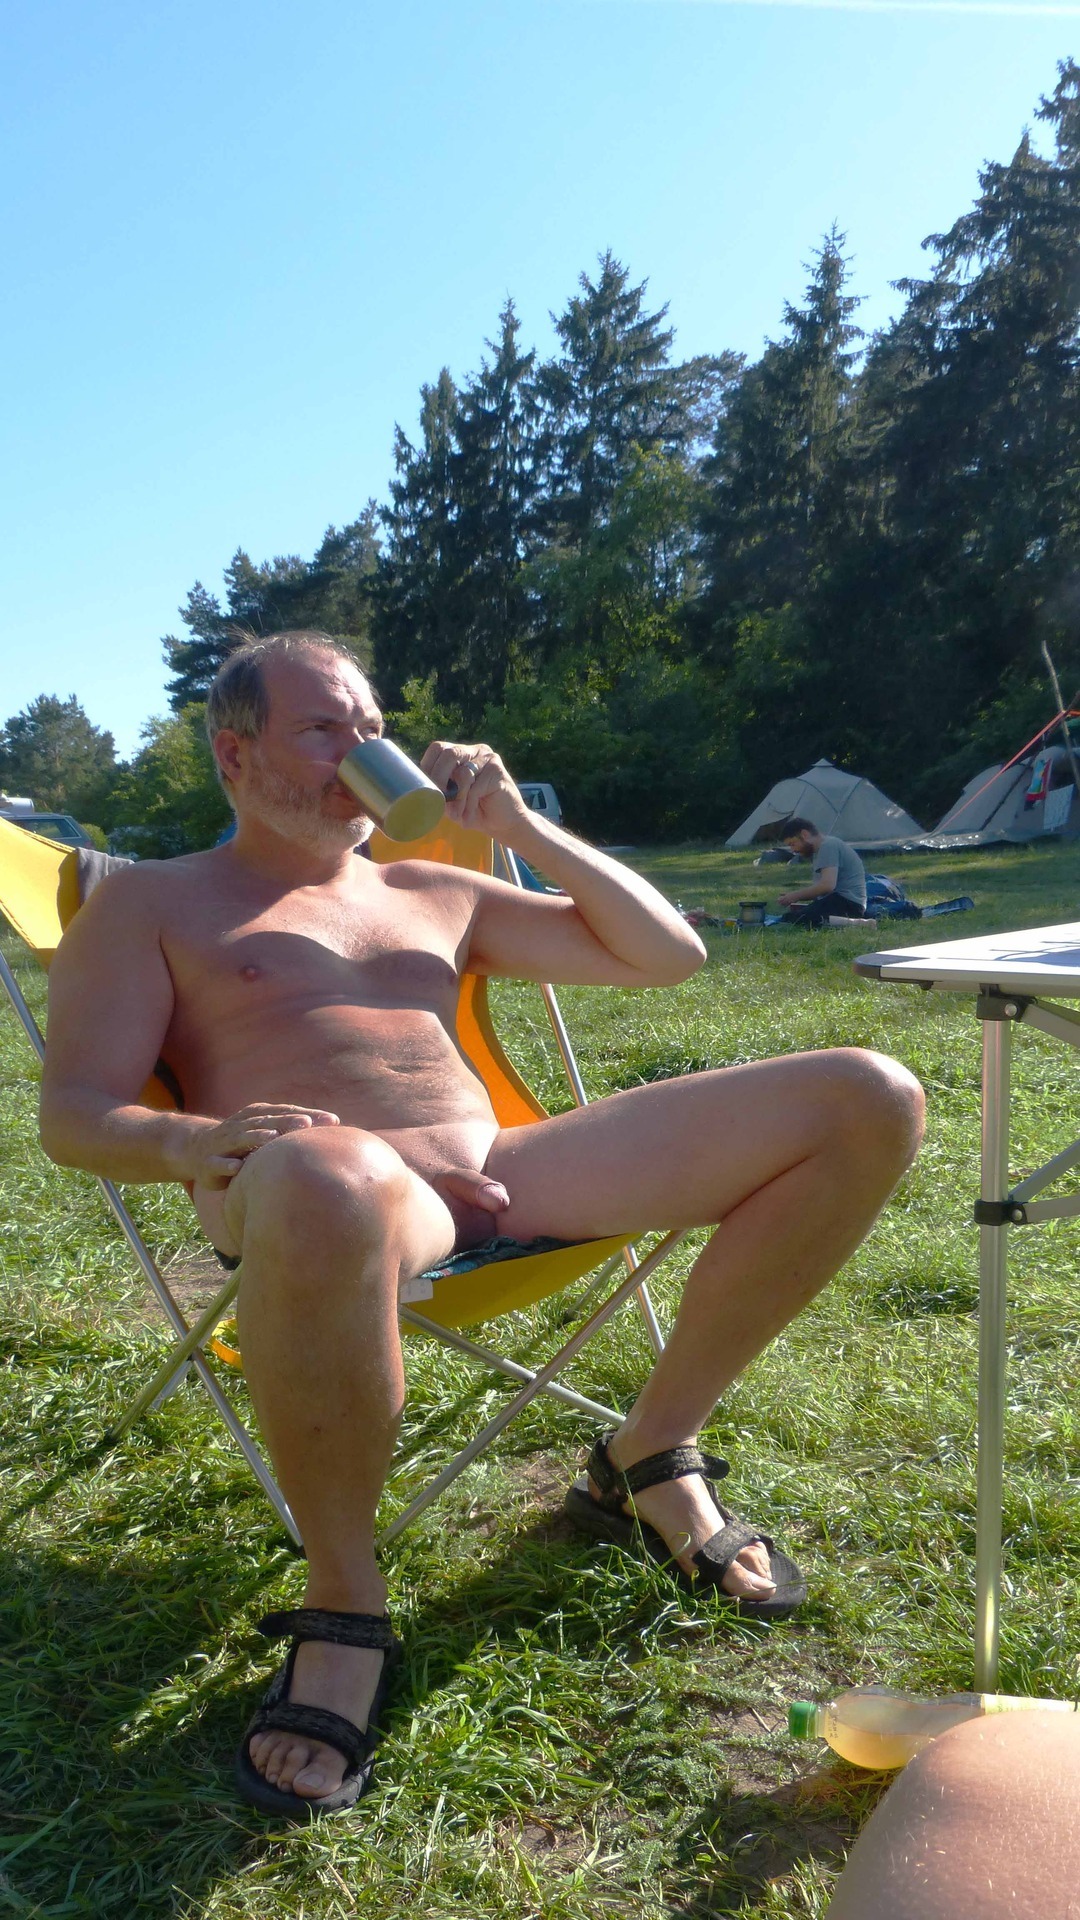 Married dude camping while wearing nothing but his dad vacation sandals